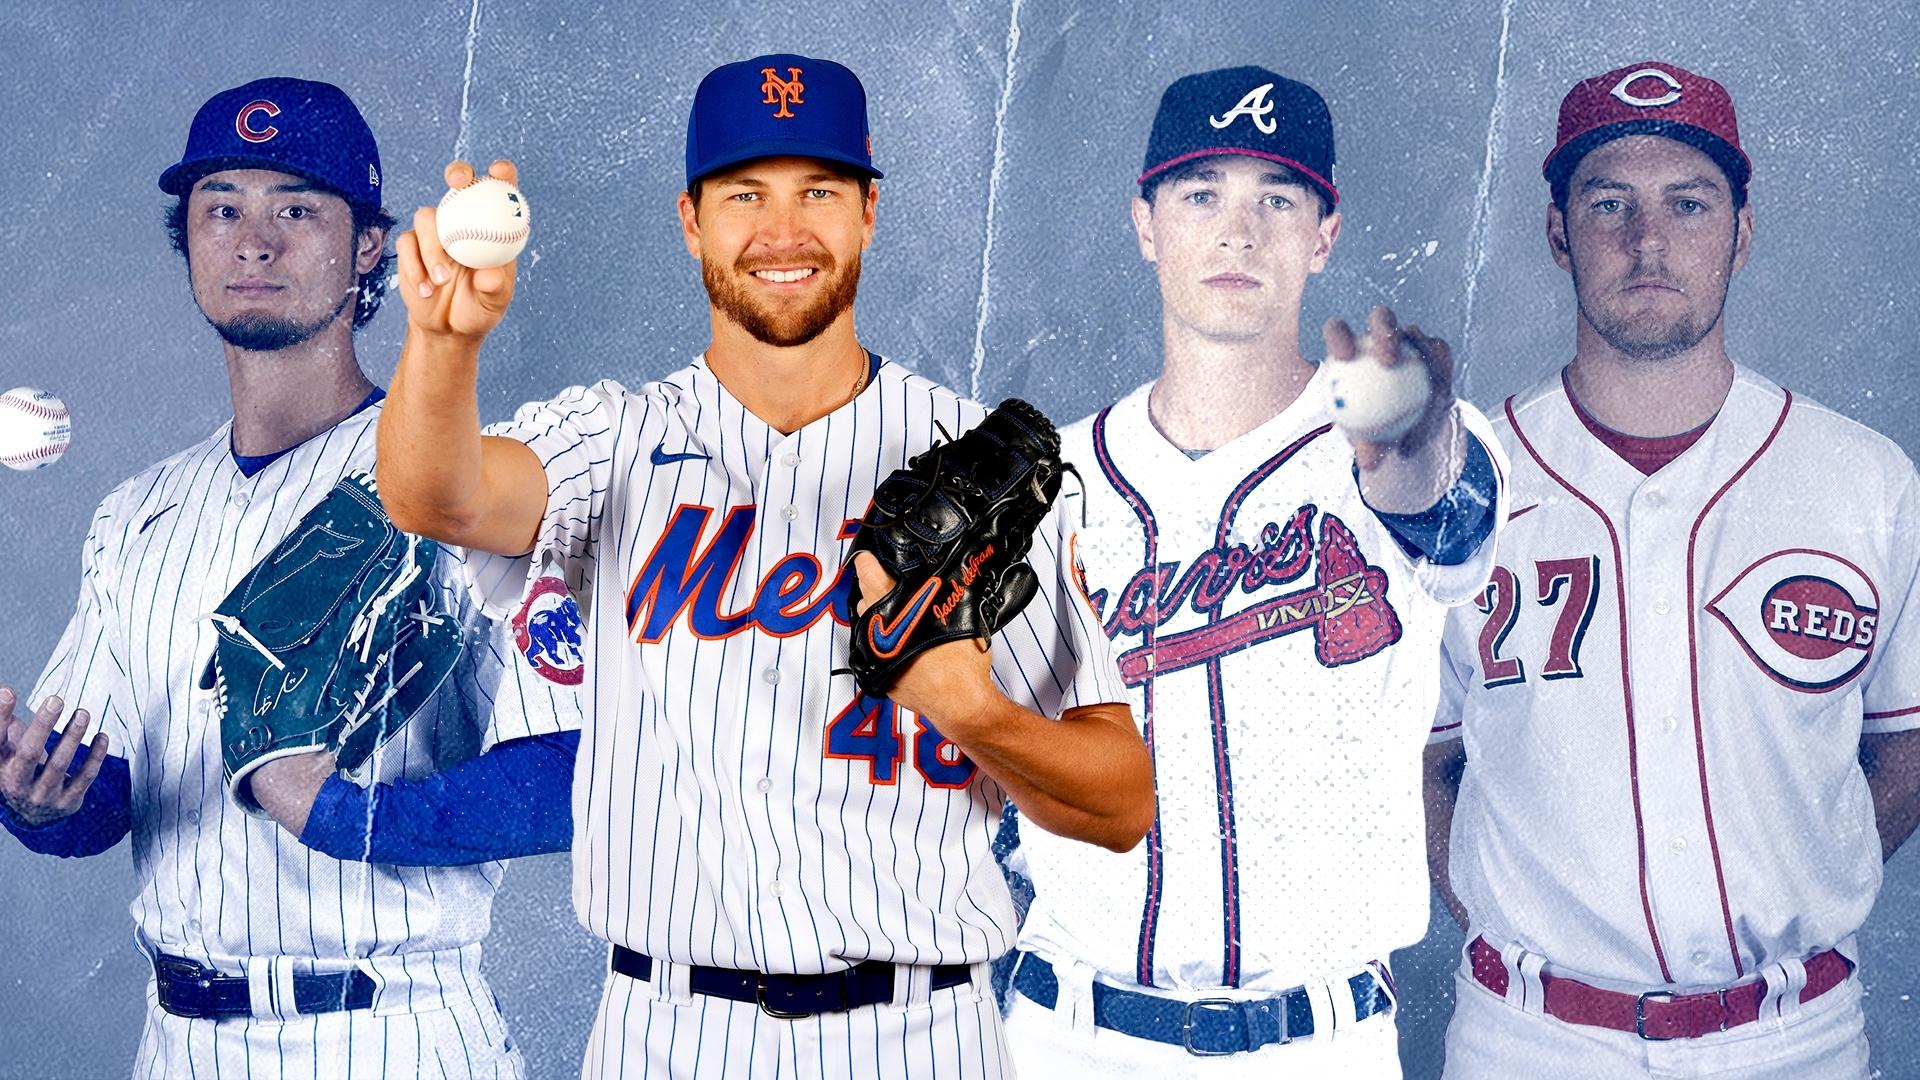 Yu Darvish, Jacob deGrom, Max Fried, and Trevor Bauer / SNY treated image